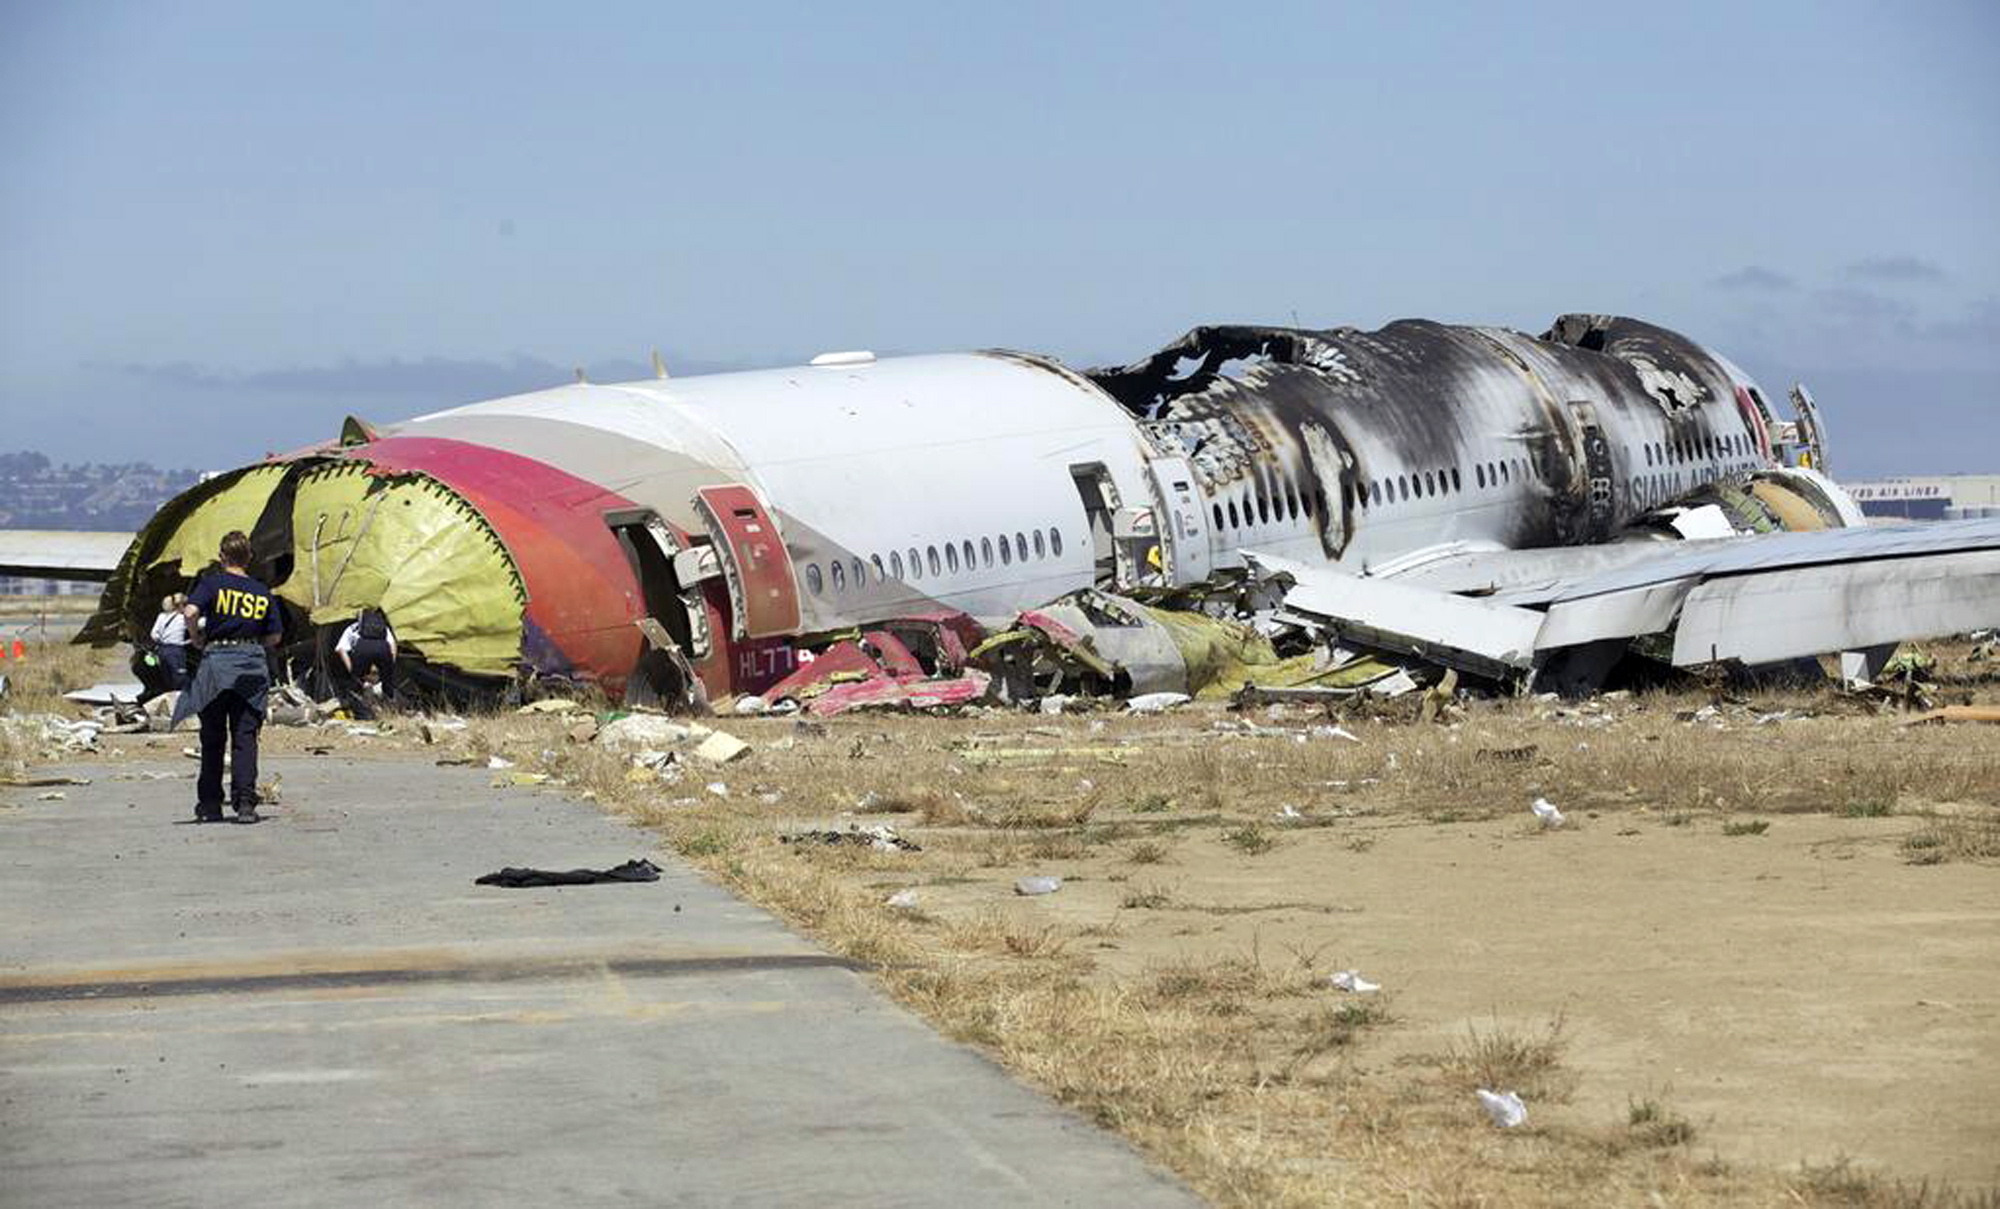 This image released by the National Transportation Safety Board Sunday, July 7, 2013, shows NTSB workers near the Boeing 777 Asiana Airlines Flight 214 aircraft. The Asiana flight crashed upon landing Saturday, July 6, at San Francisco International Airport, and two of the 307 passengers aboard were killed.